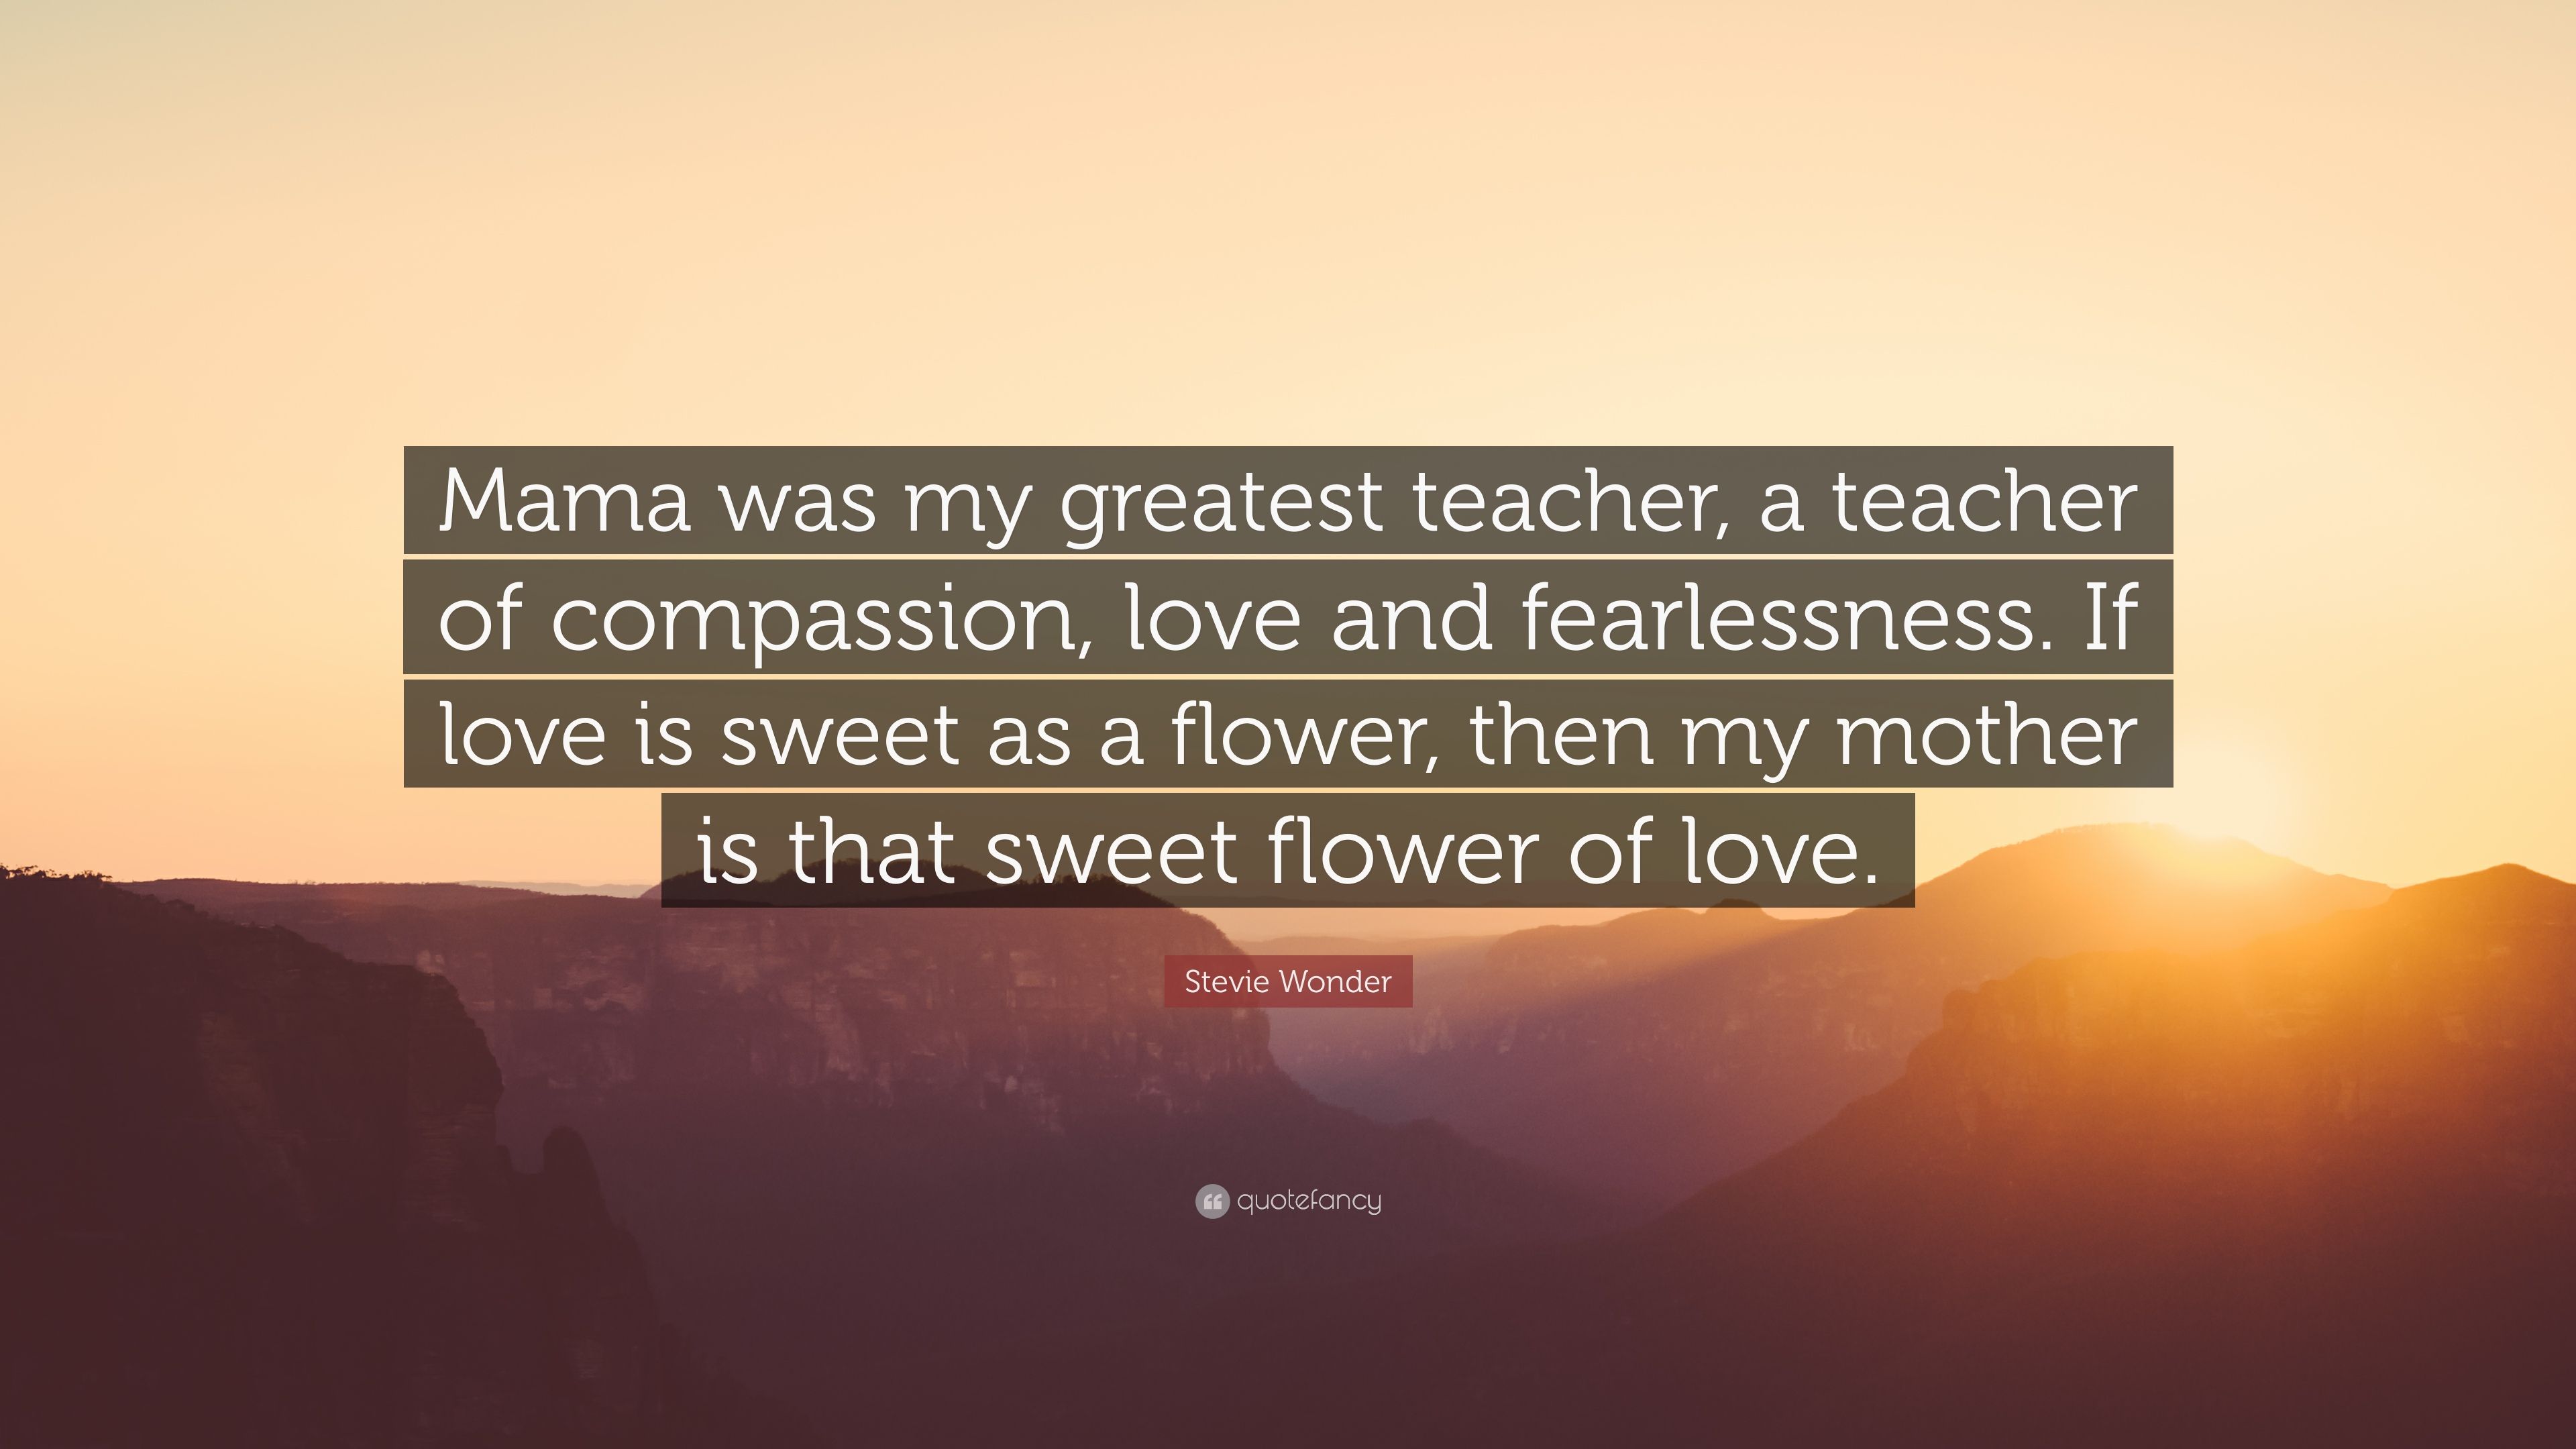 Stevie Wonder Quote: “Mama was my greatest teacher, a teacher of compassion, love and fearlessness. If love is sweet as a flower, then my moth.” (9 wallpaper)